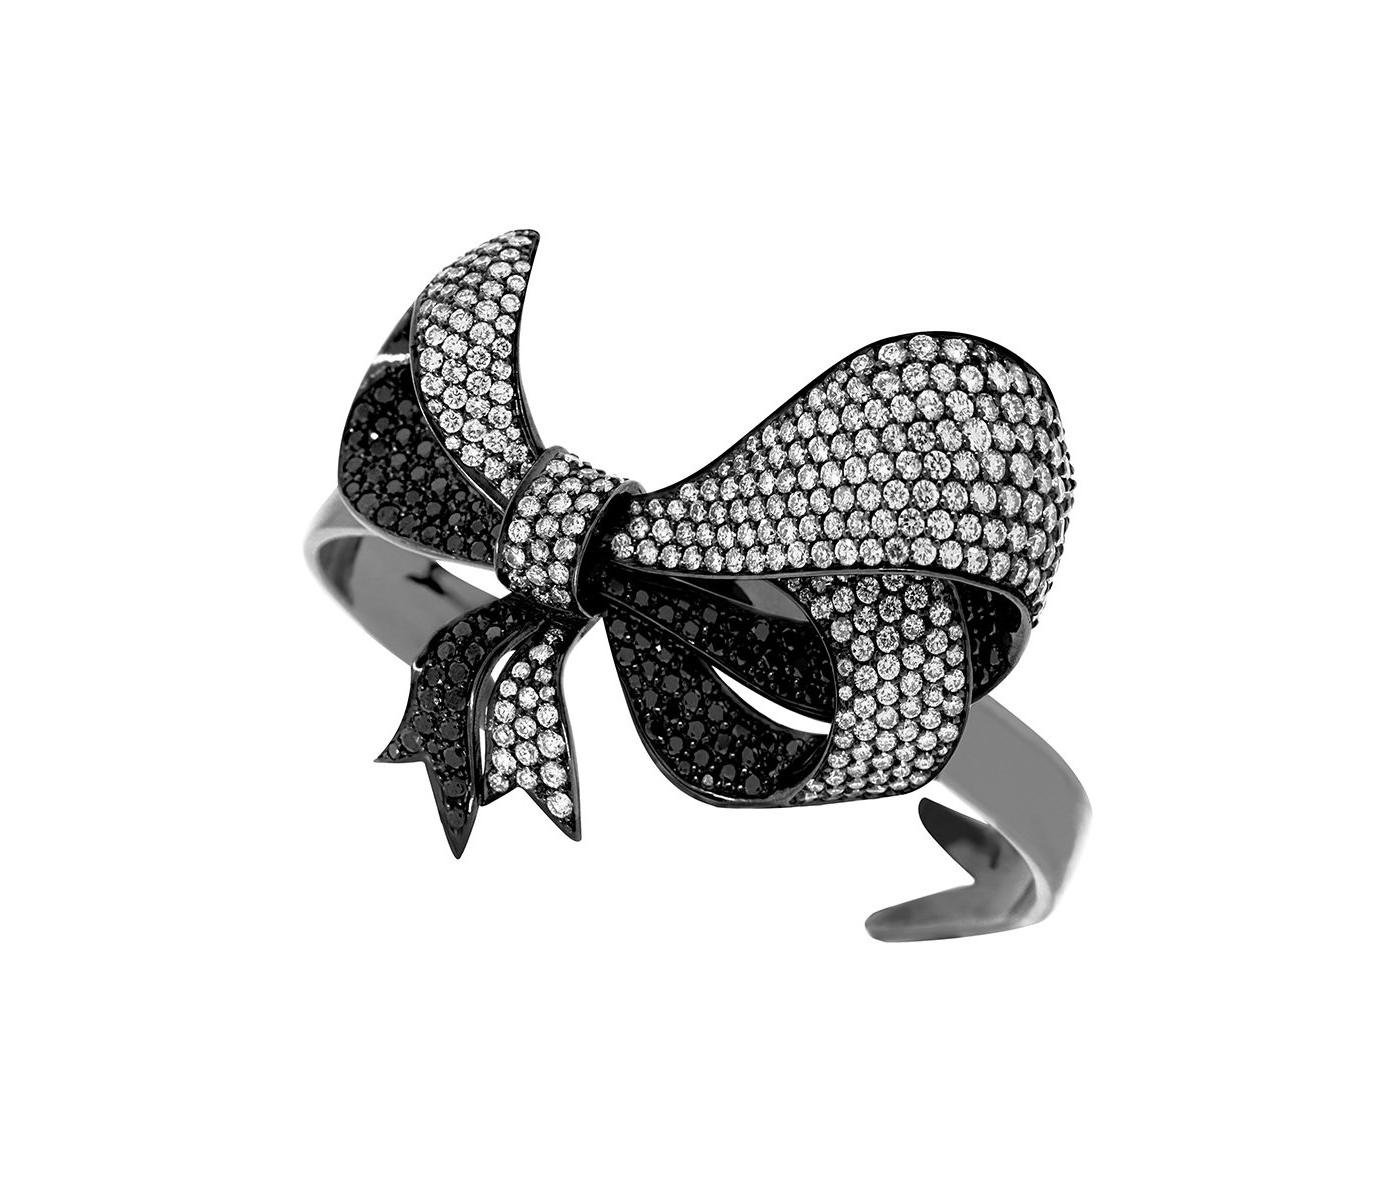 Cuff by Colette